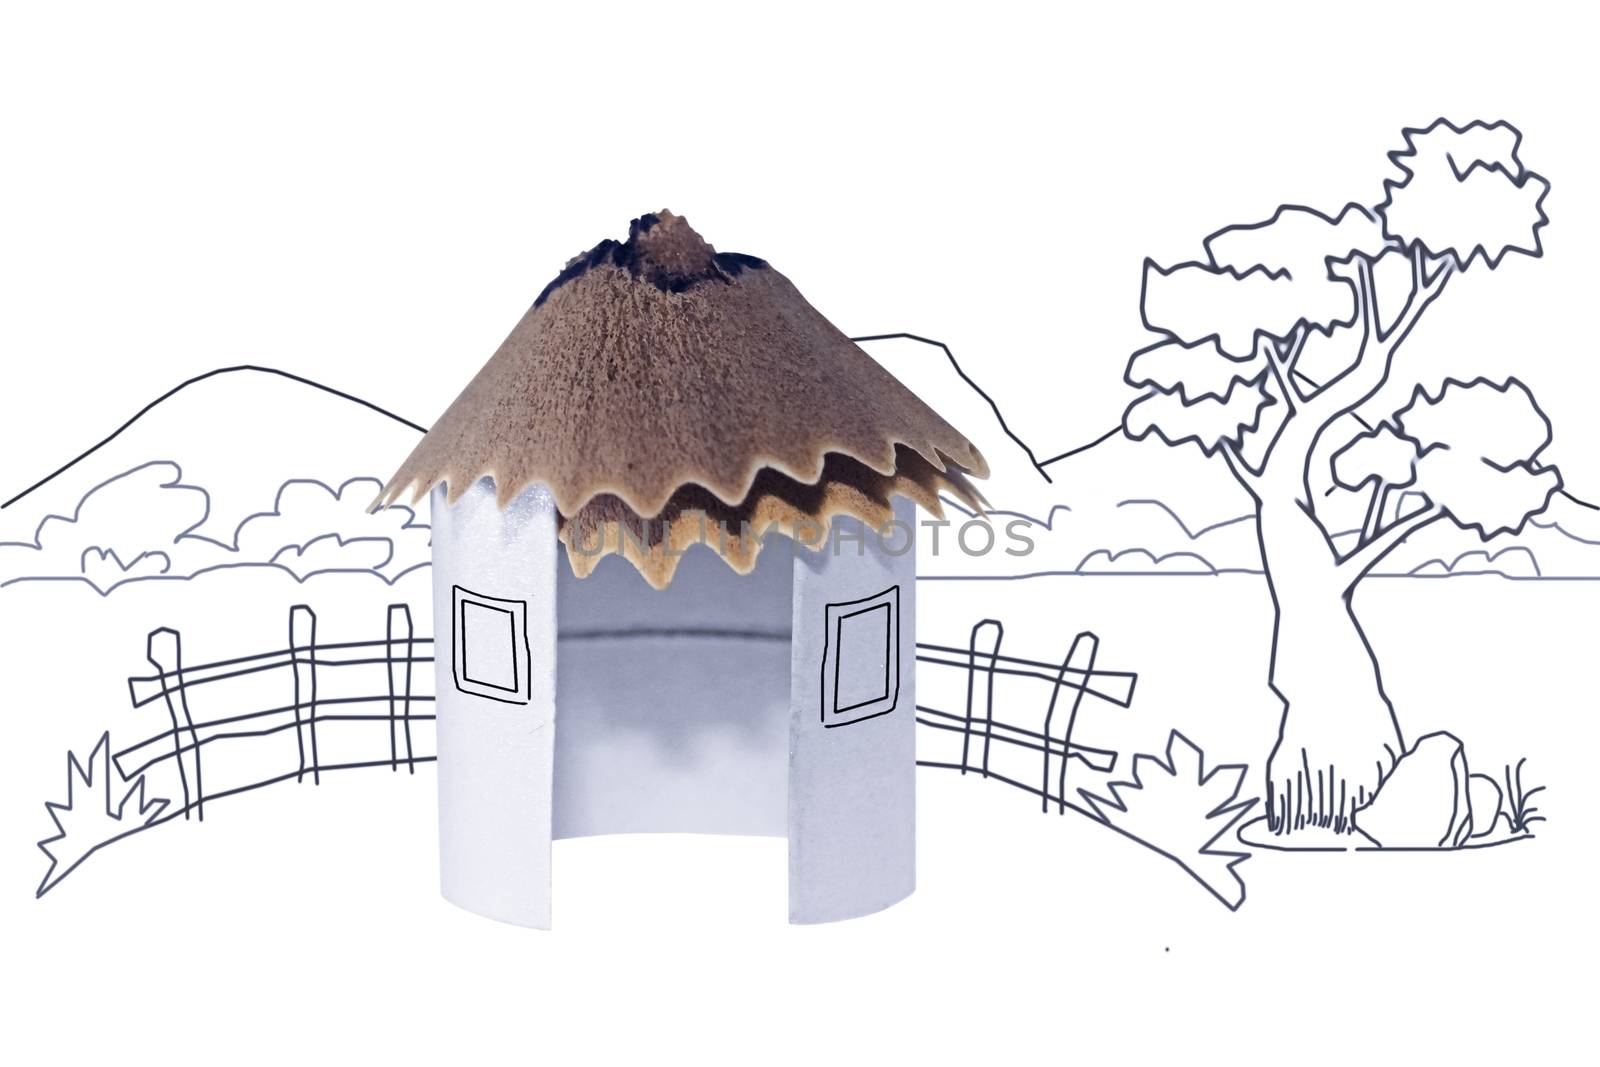 Paper Hut, Pencil Shavings Roof with Line drawing background by yands